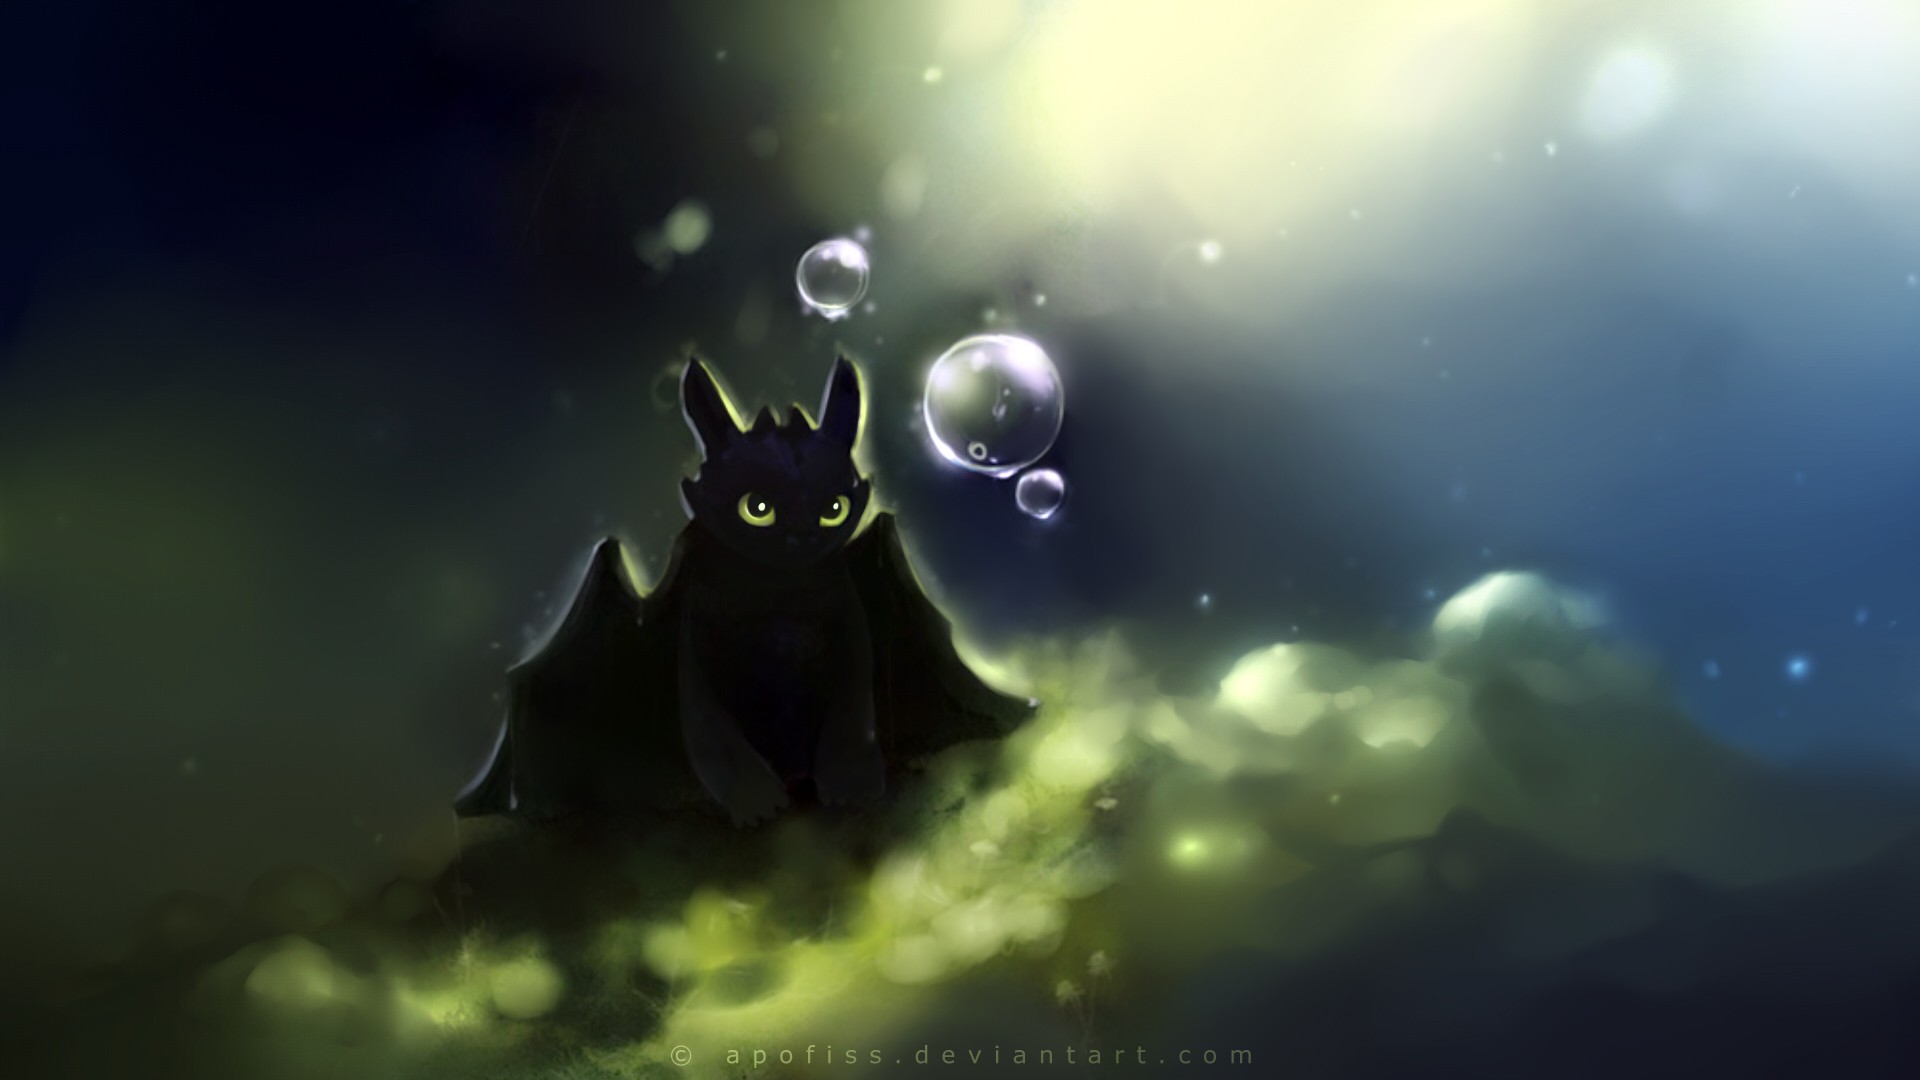 Toothless Night Fury How To Train Your Dragon How To Train Your Dragon 2 Dragon Apofiss Bubbles 1920x1080